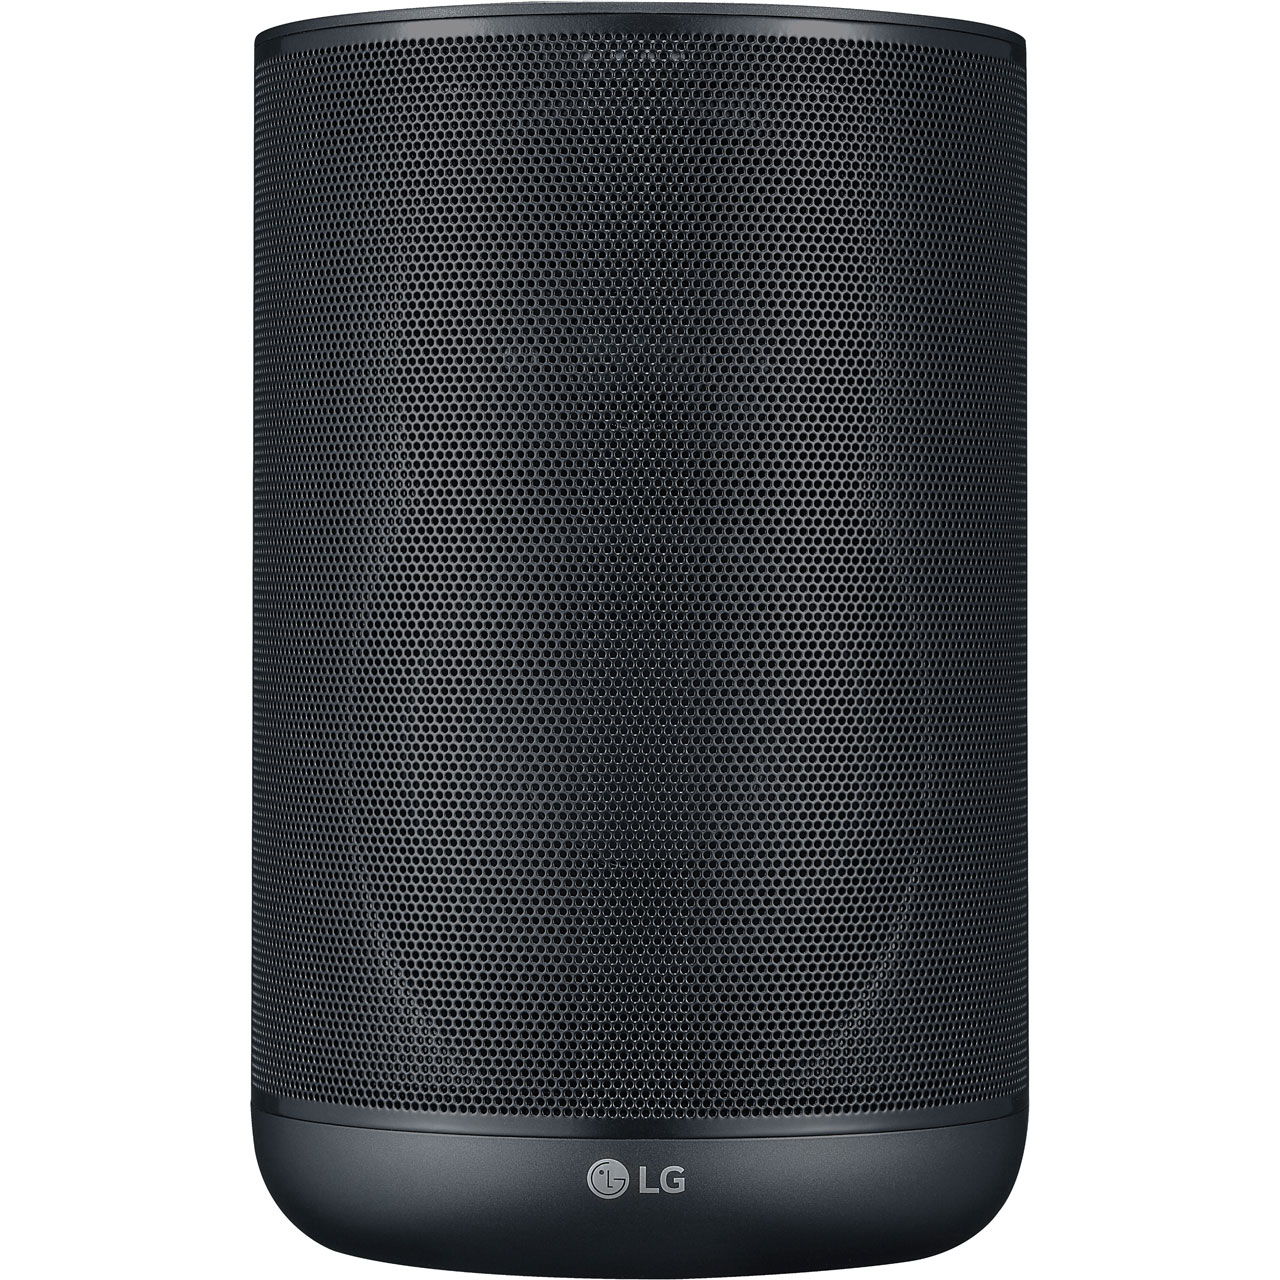 LG XBOOM AI ThinQ Wireless Speaker with Google Assistant Review